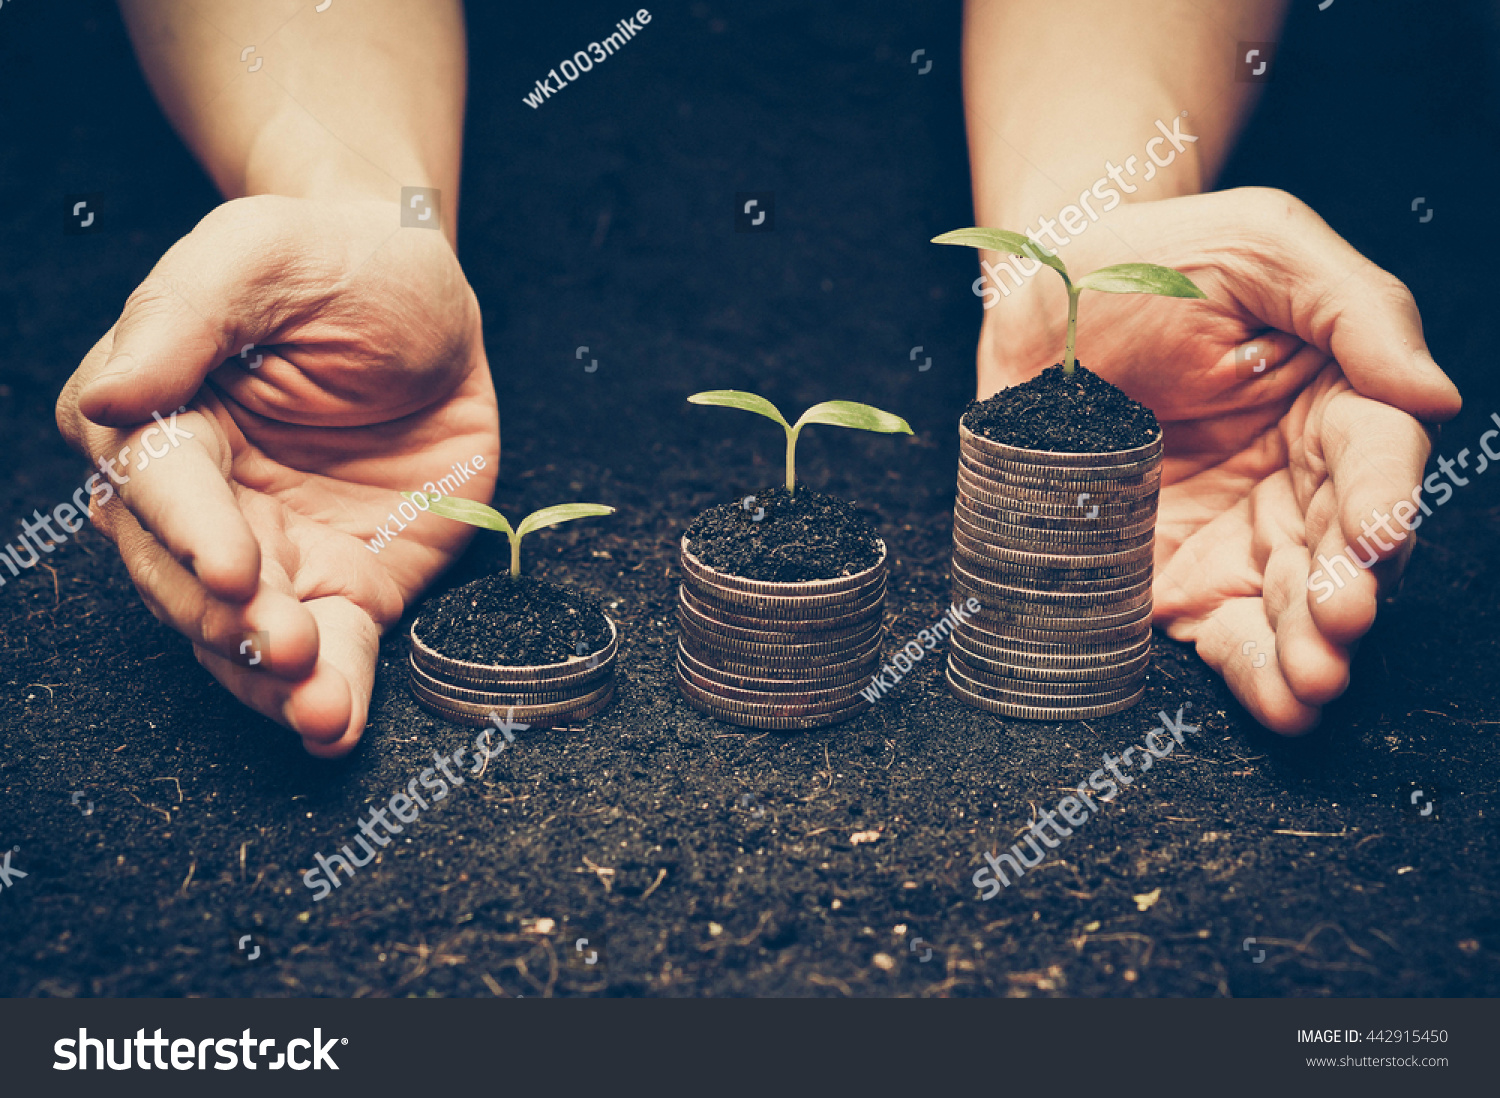 hands holding trees growing on coins / csr / sustainable development / economic growth / trees growing on stack of coins / Business with environmental concern #442915450